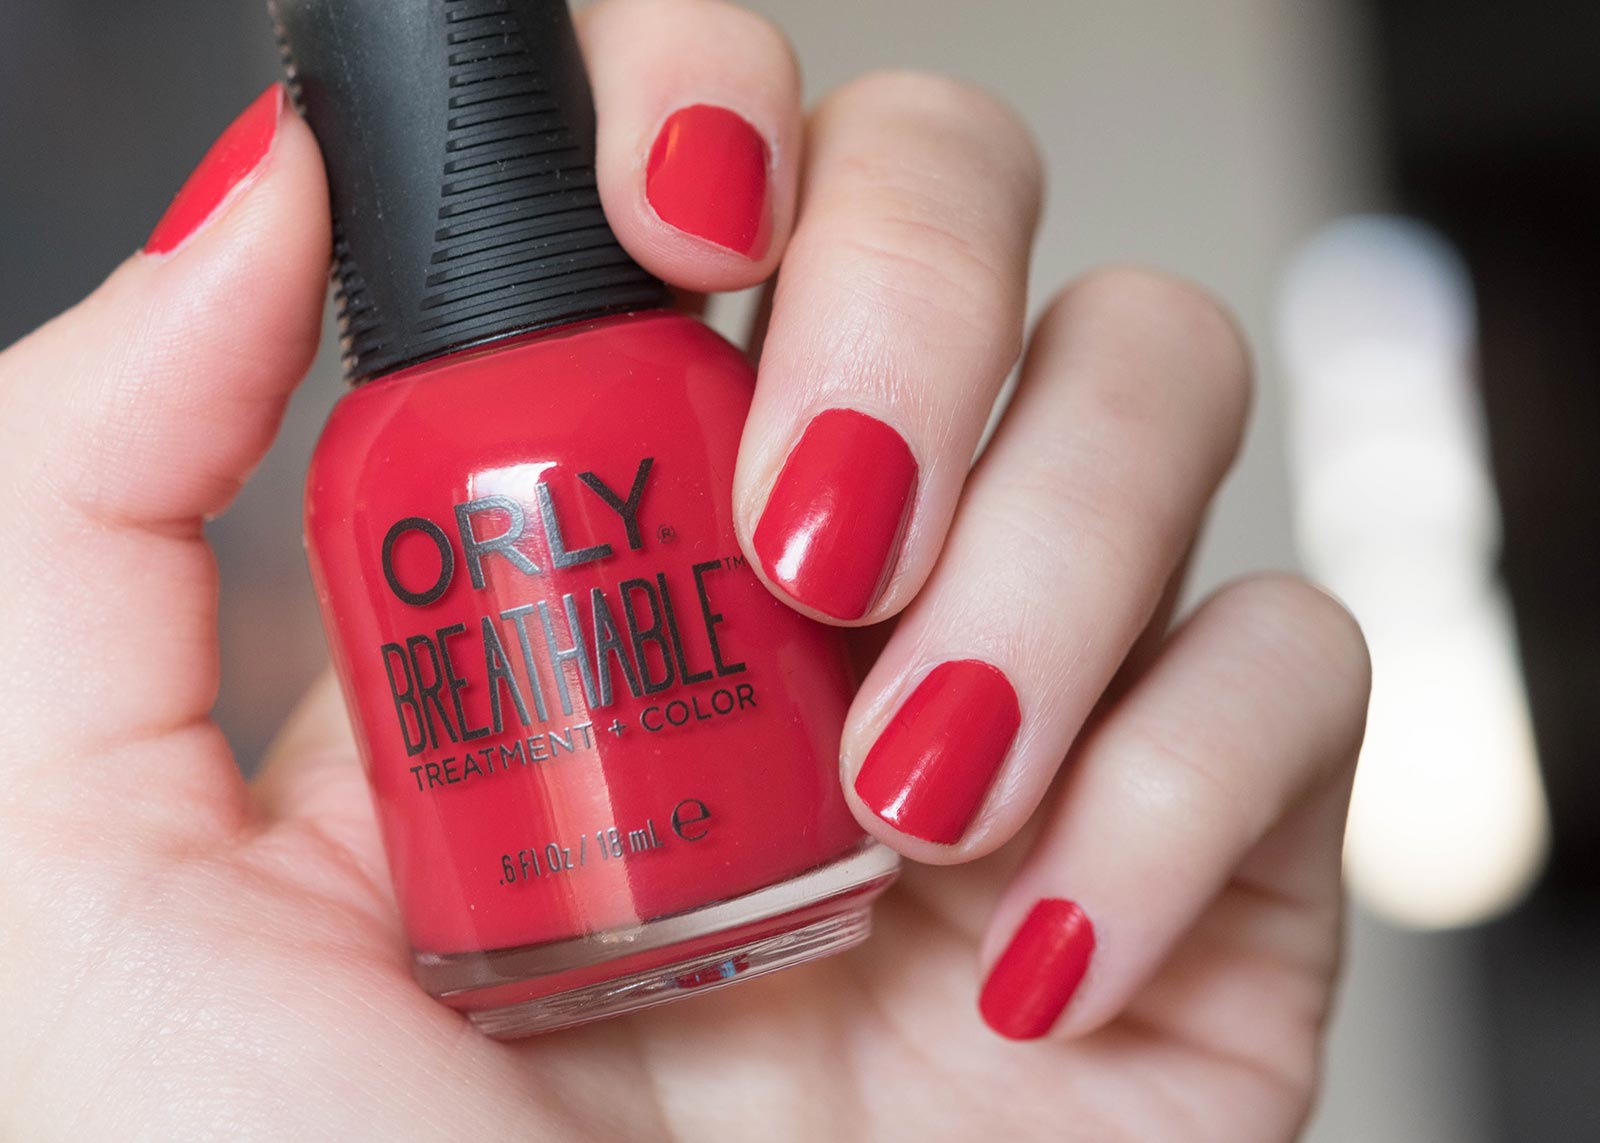 10. Orly Nail Lacquer in "Gumdrop" - wide 4